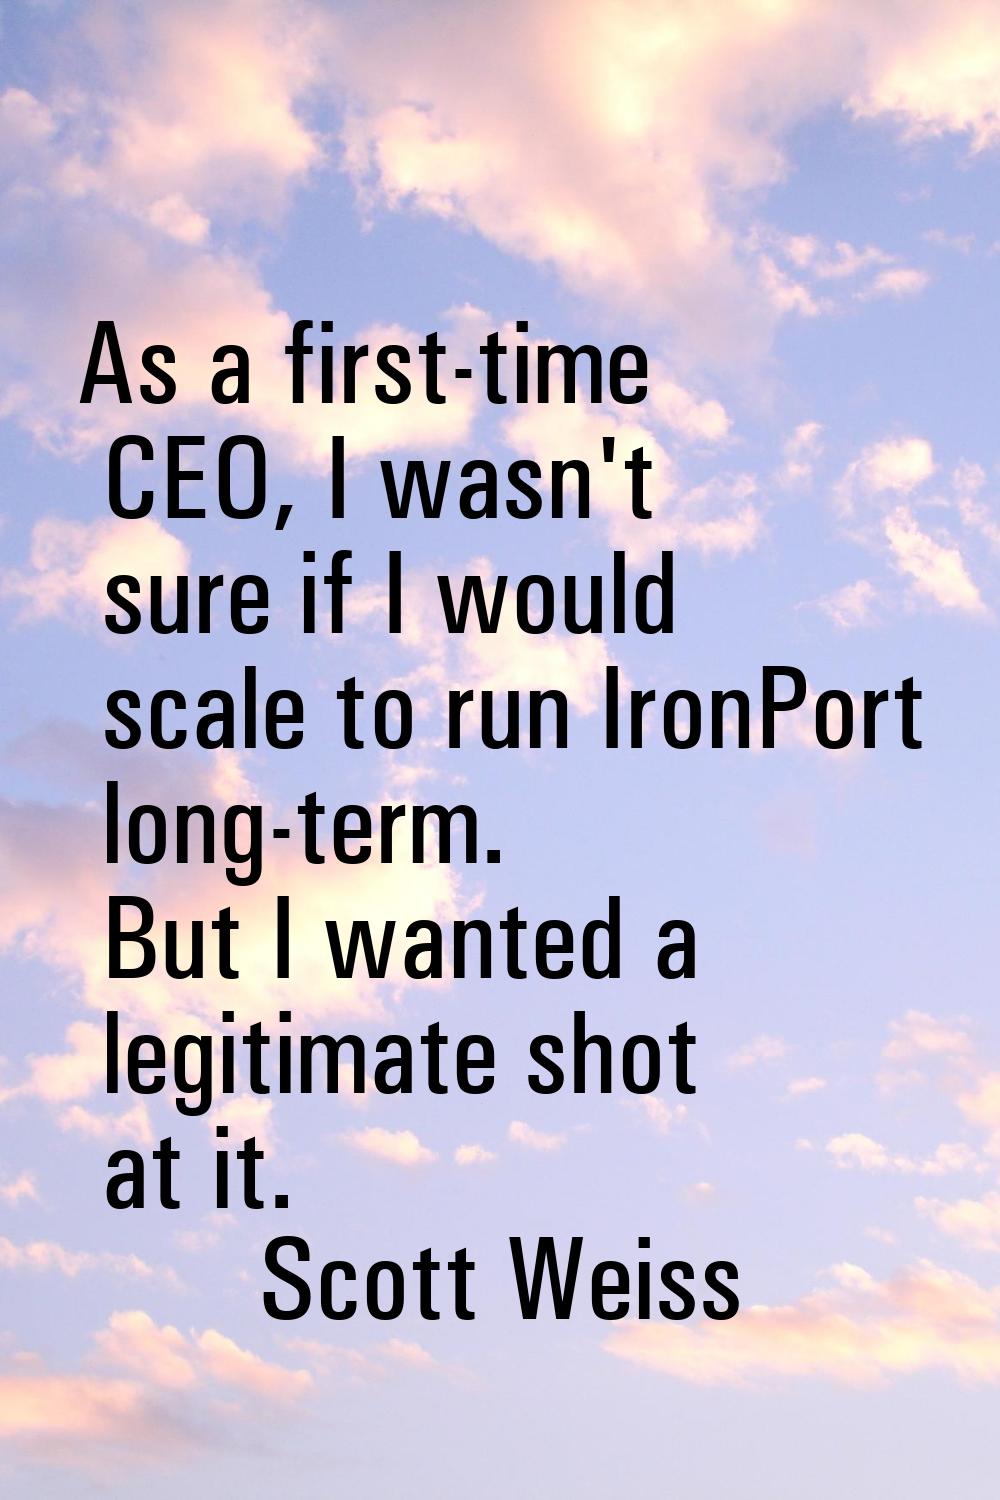 As a first-time CEO, I wasn't sure if I would scale to run IronPort long-term. But I wanted a legit